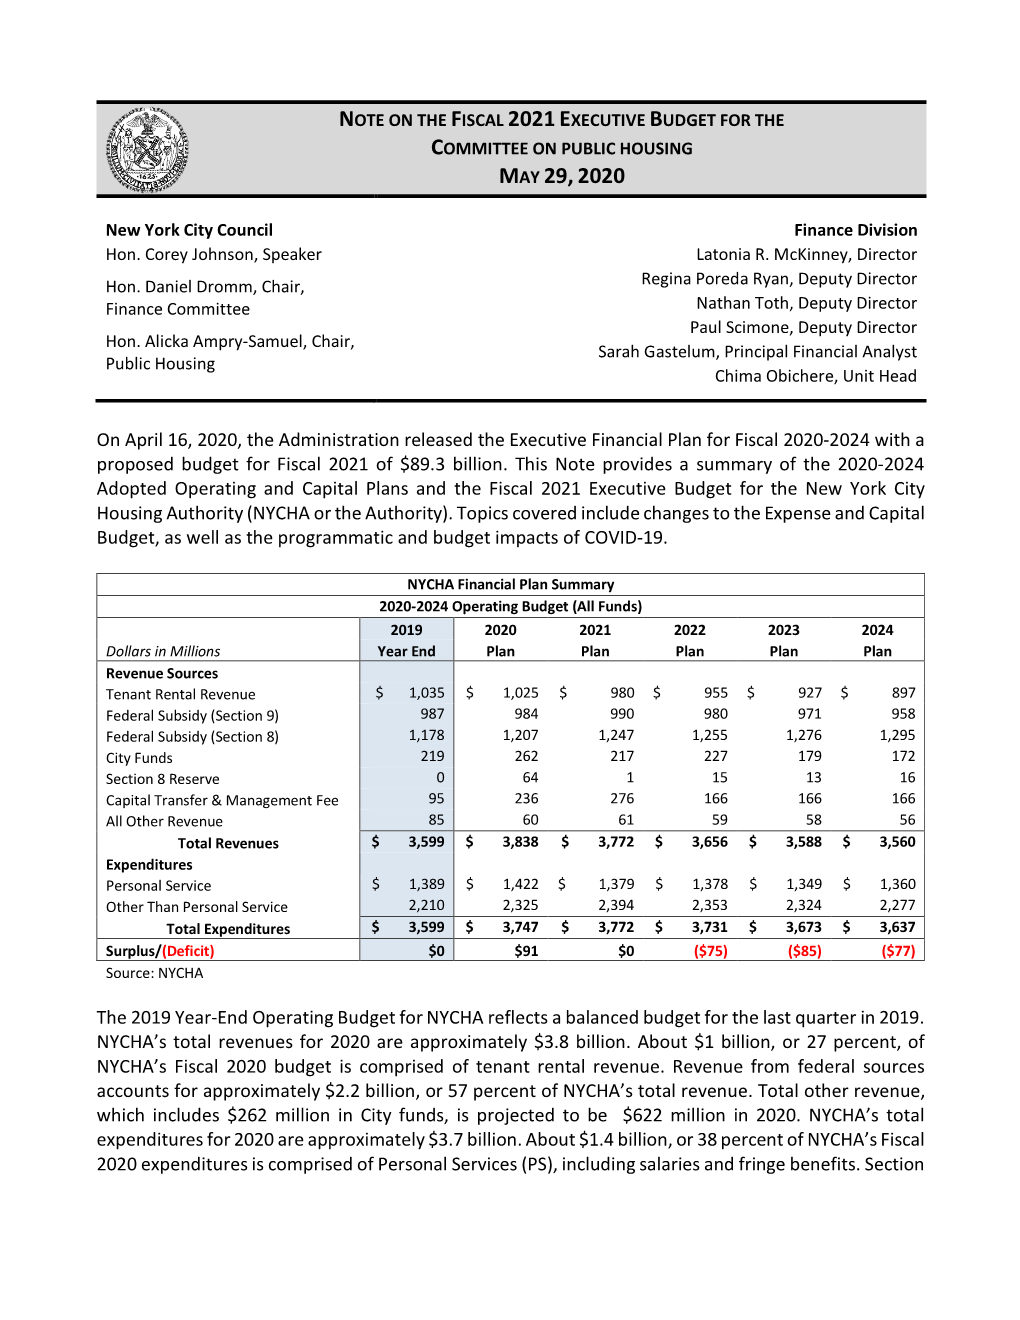 Note on the Fiscal 2021Executive Budget for the Committee on Public Housing May 29,2020